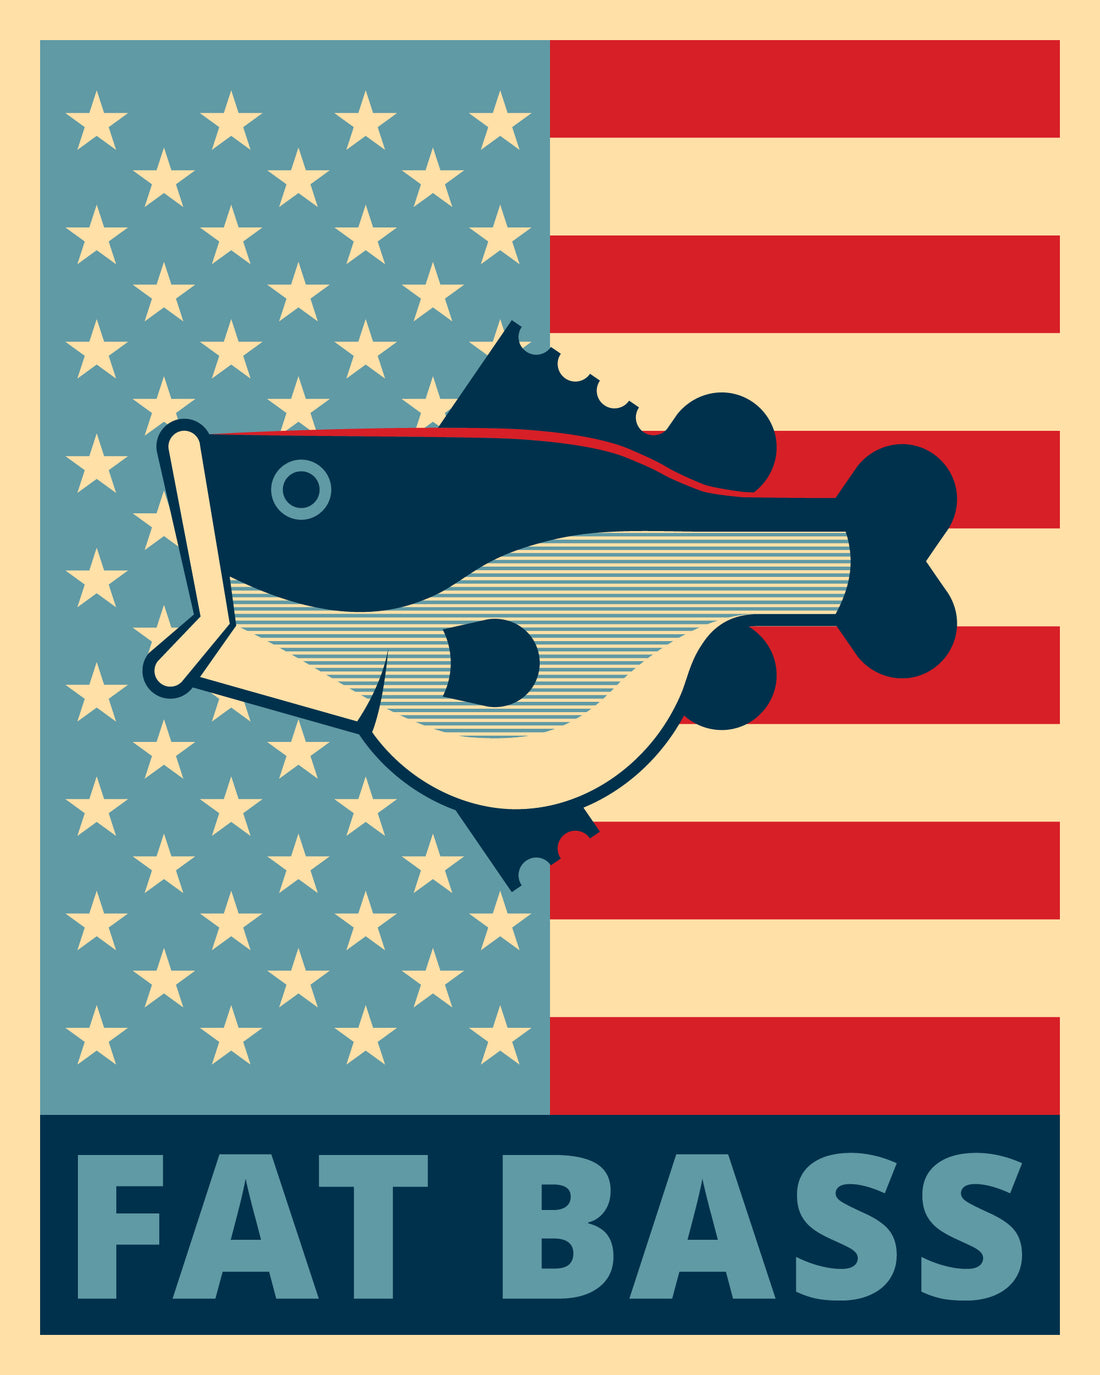 Happy 4th of July - FAT BASS